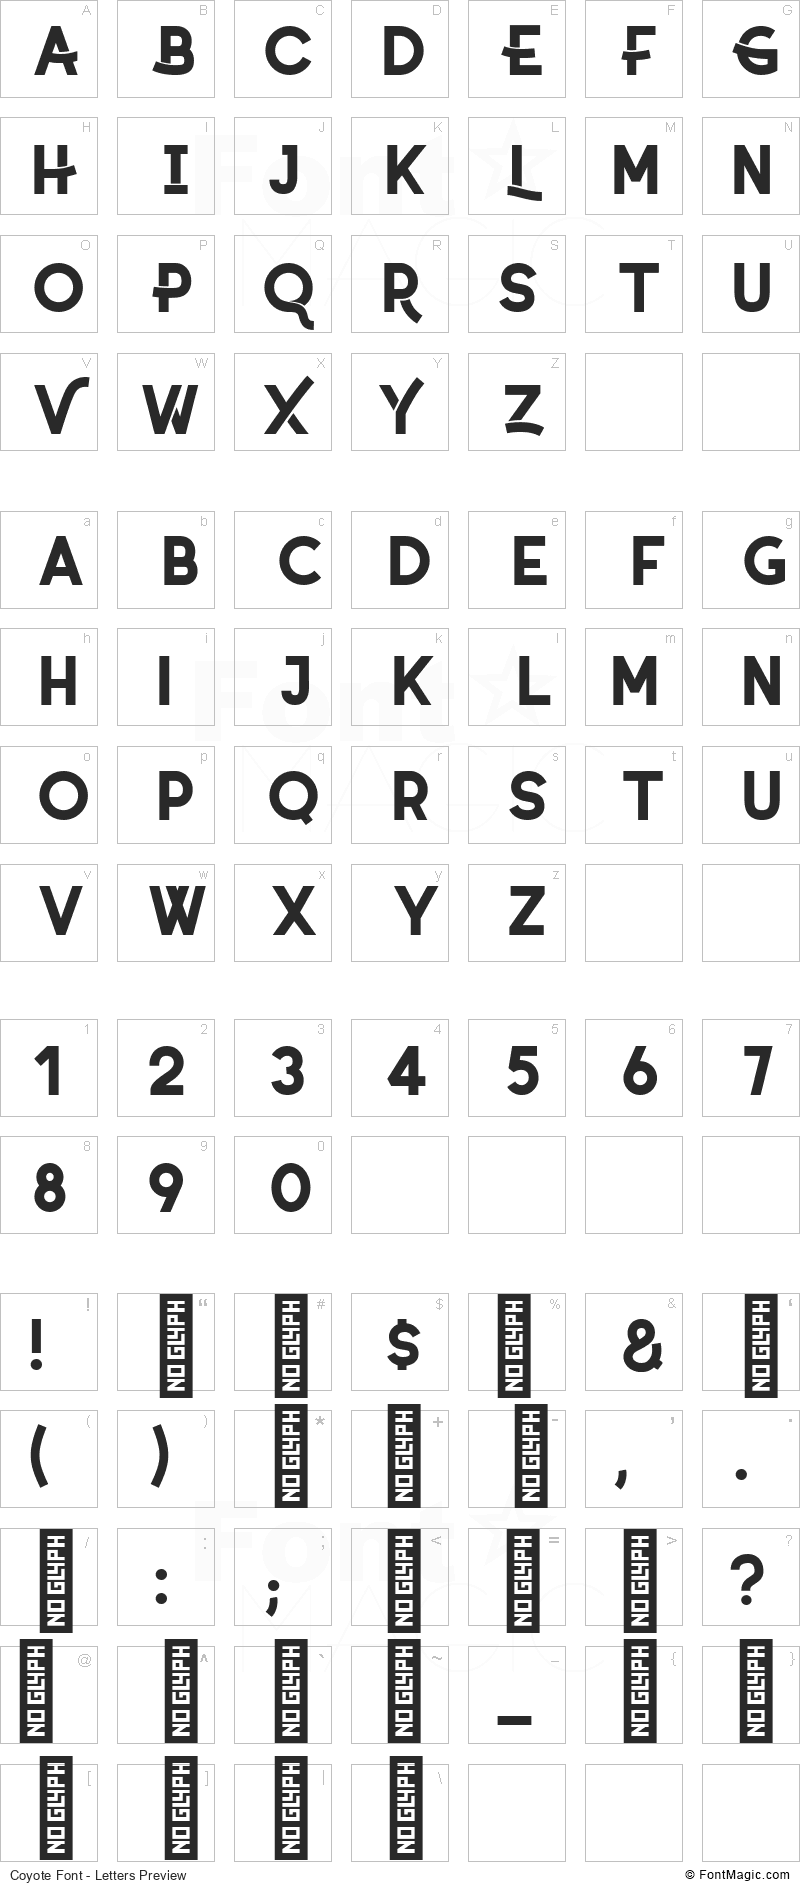 Coyote Font - All Latters Preview Chart